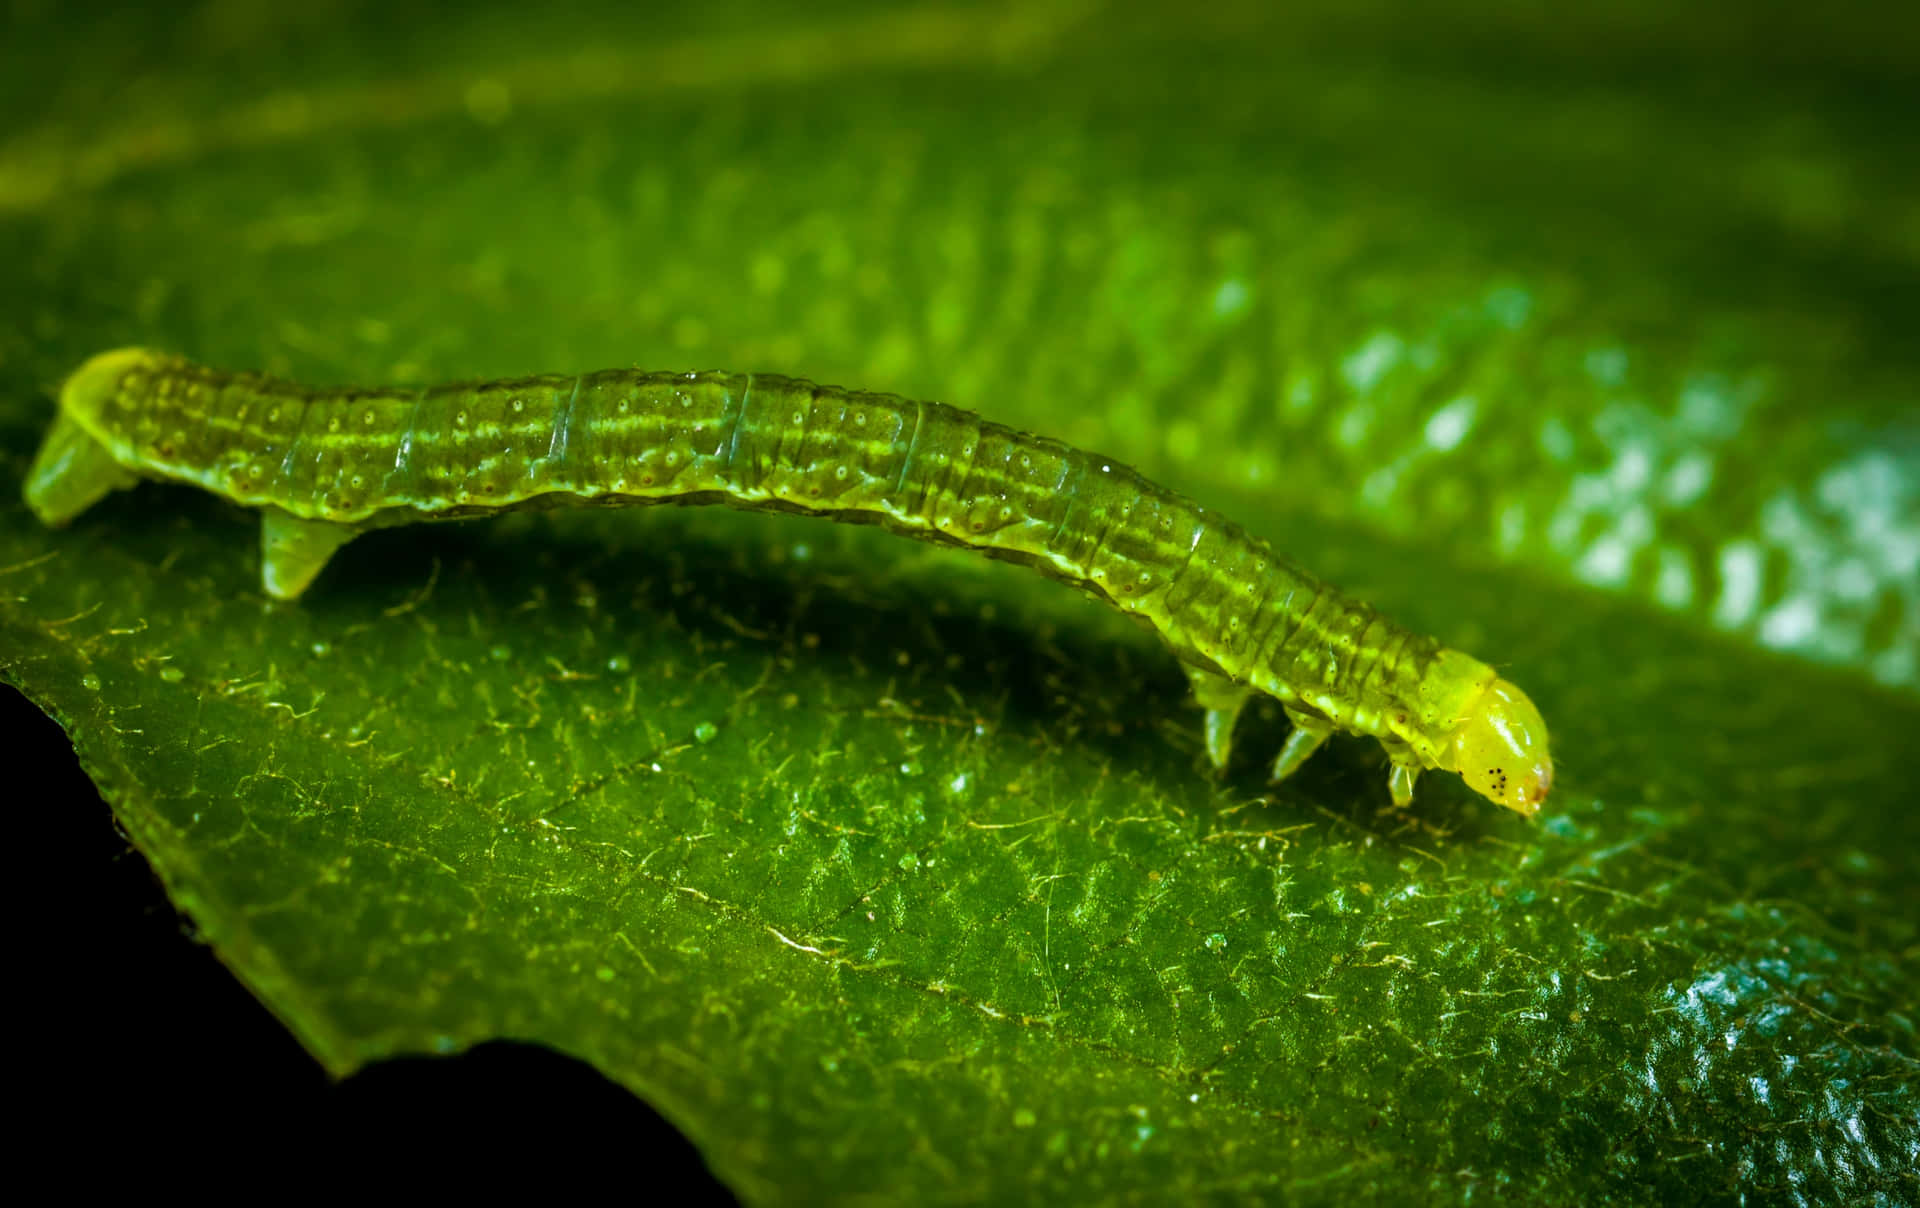 Close-up of a Caterpillar Insect